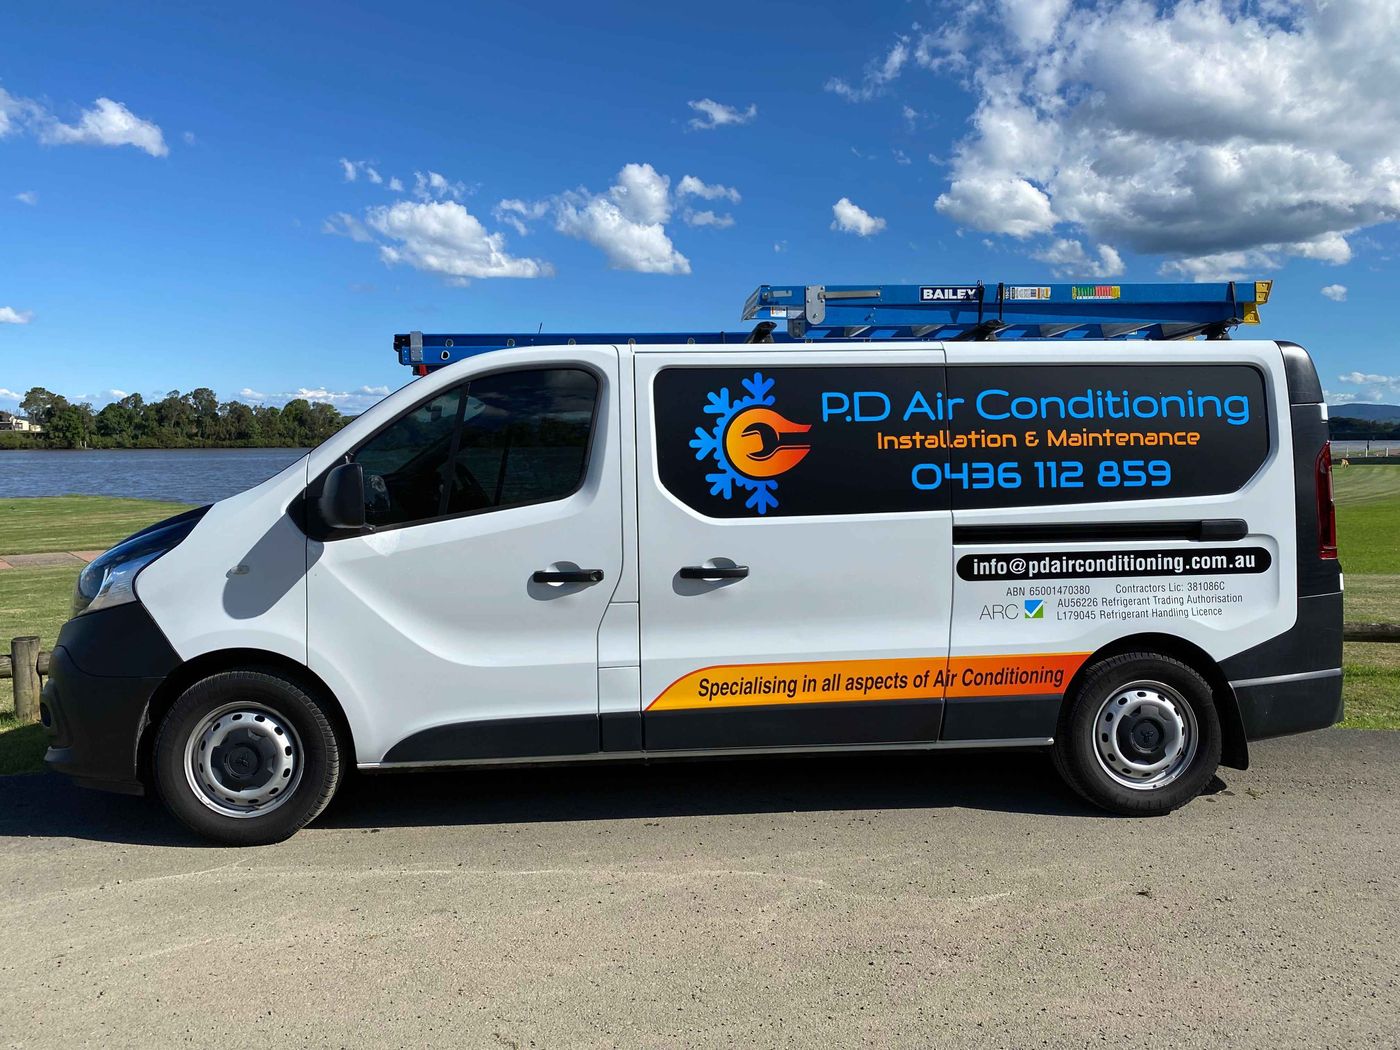 P.D Air Conditioning Installation & Maintenance image